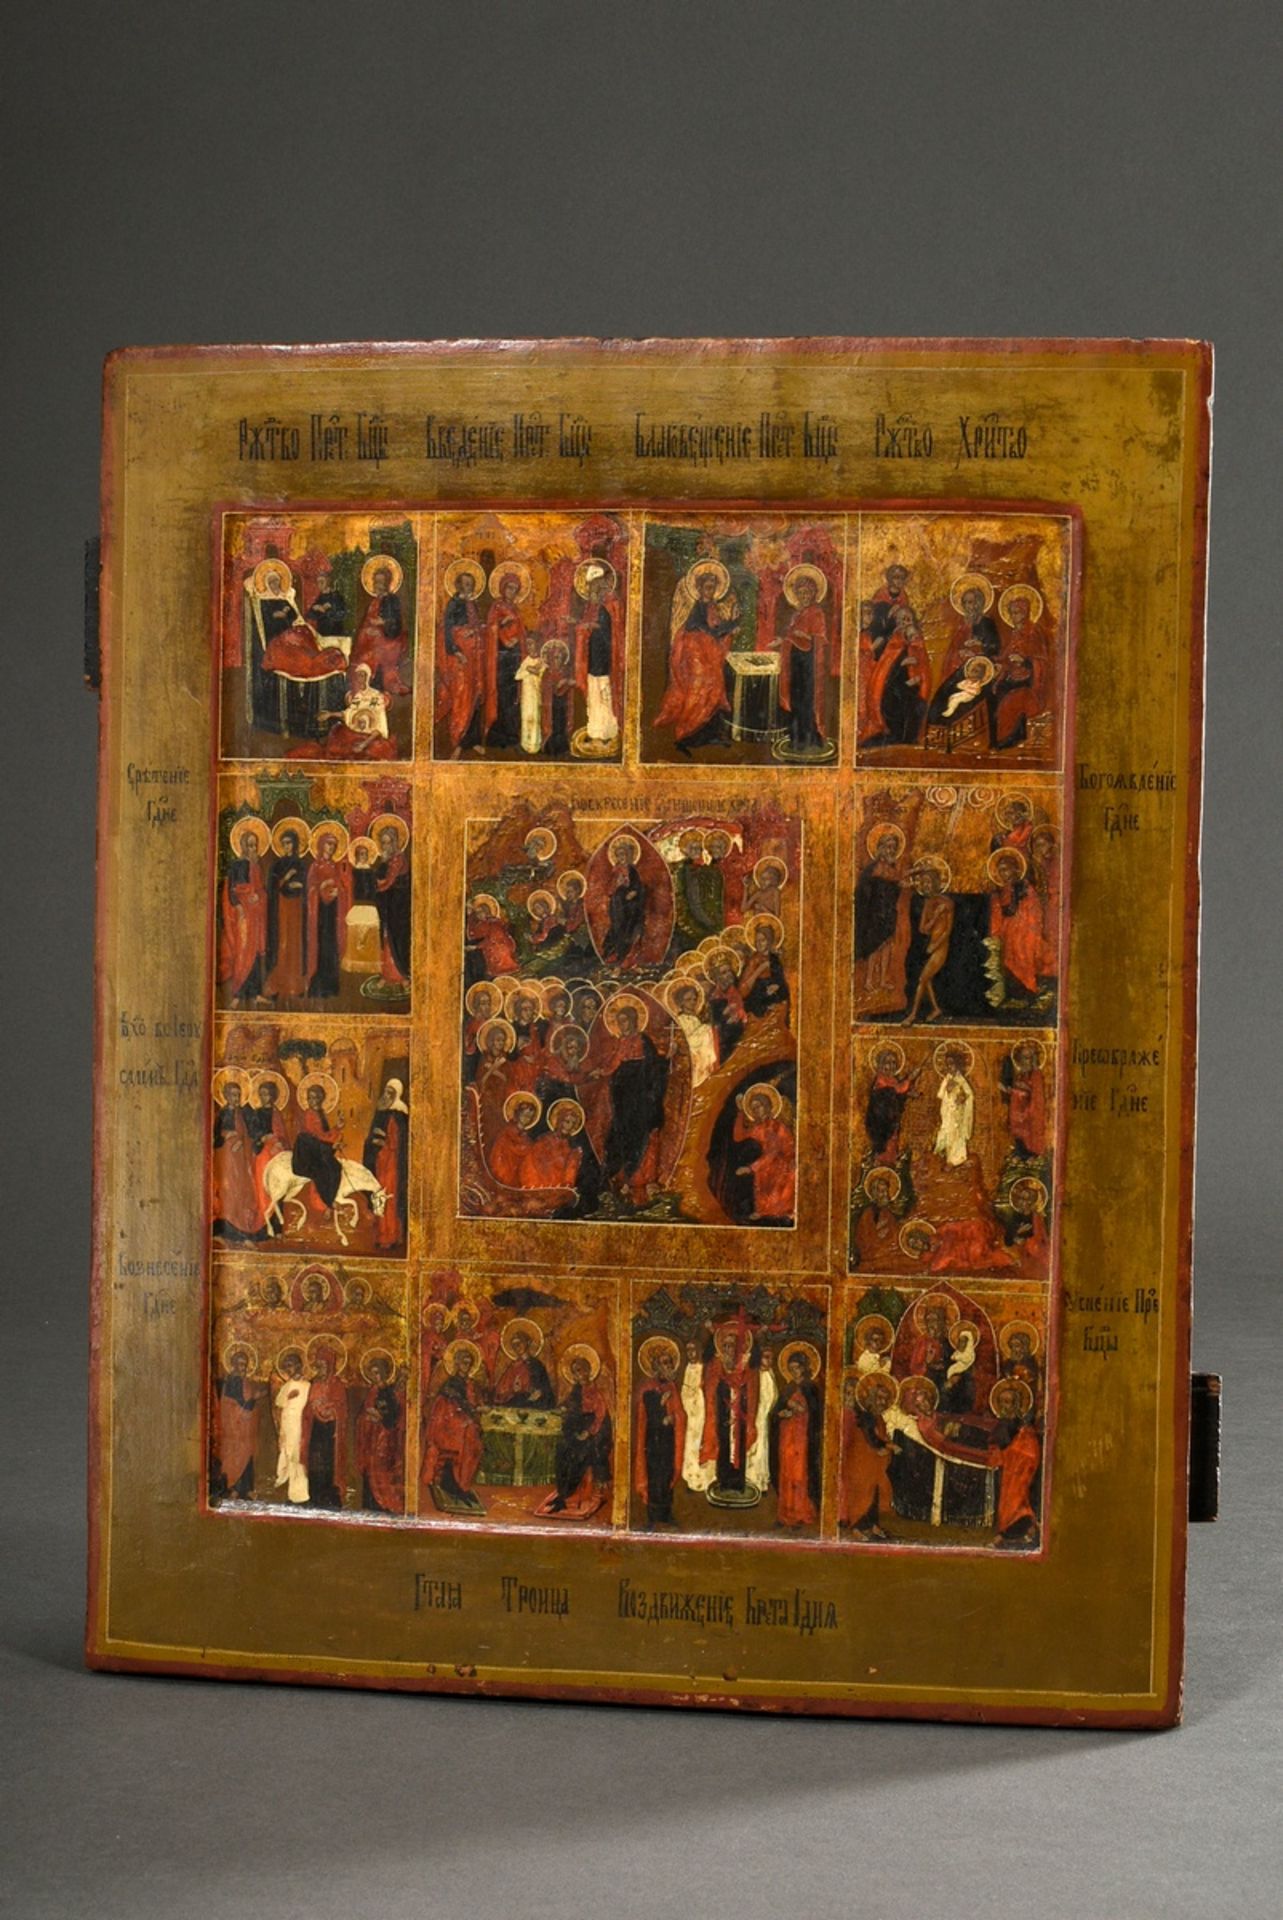 Central Russian feast day icon "Easter events, Ascension and Resurrection of Christ" in the central